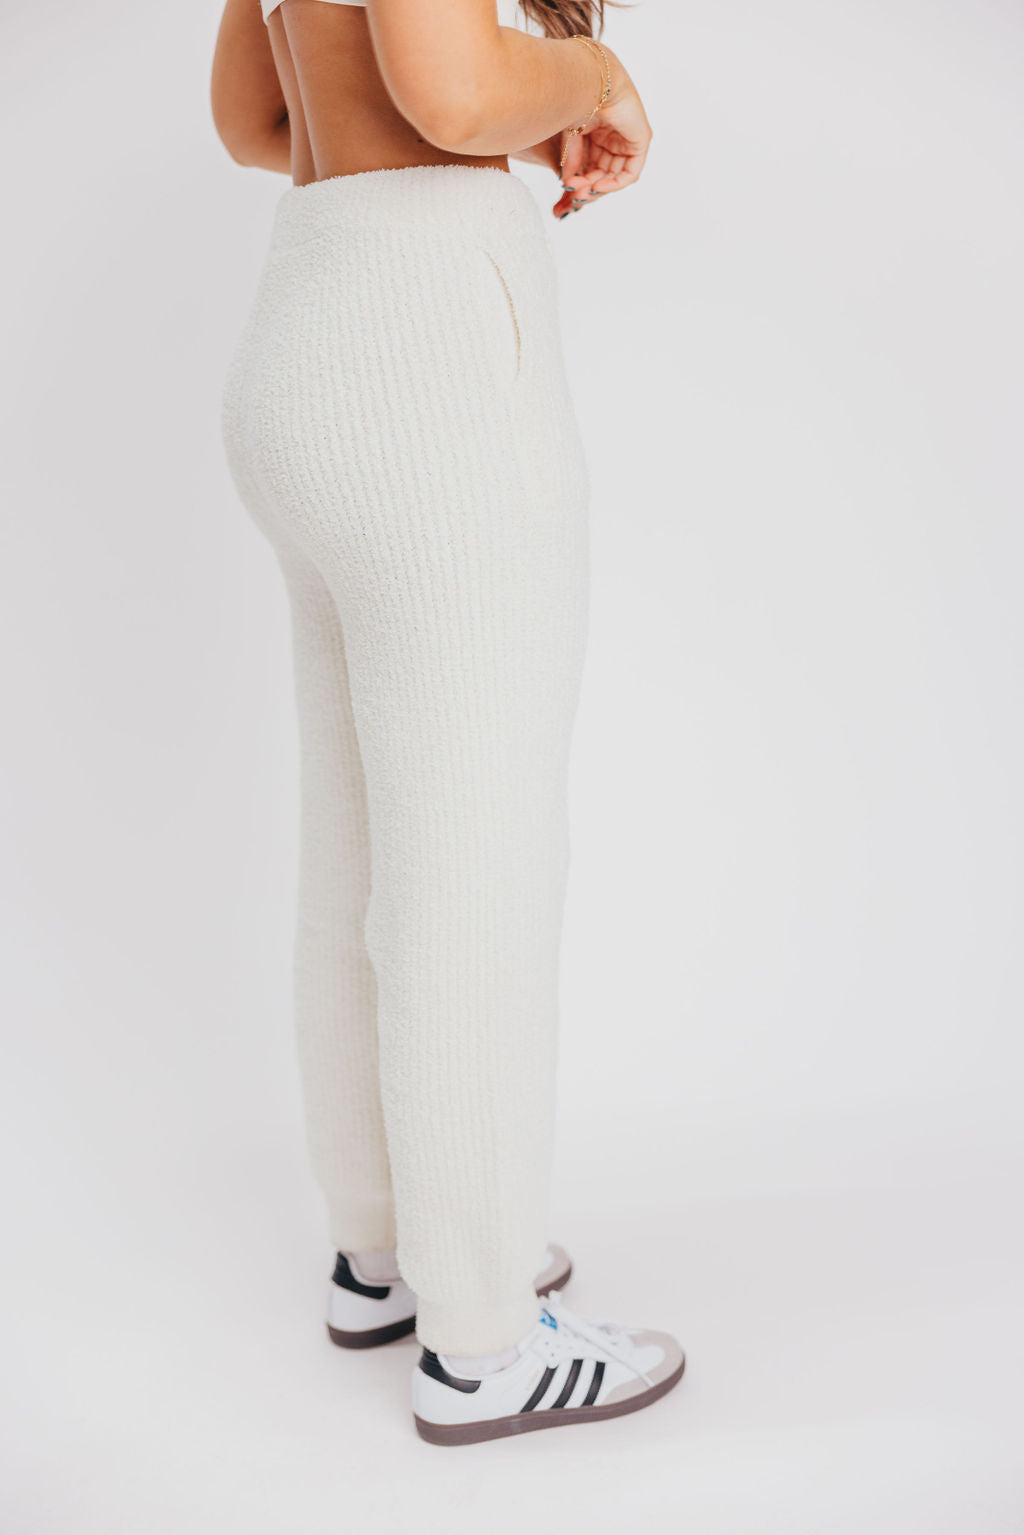 Ida Luxury Soft Ribbed Pants with Pockets in Ivory